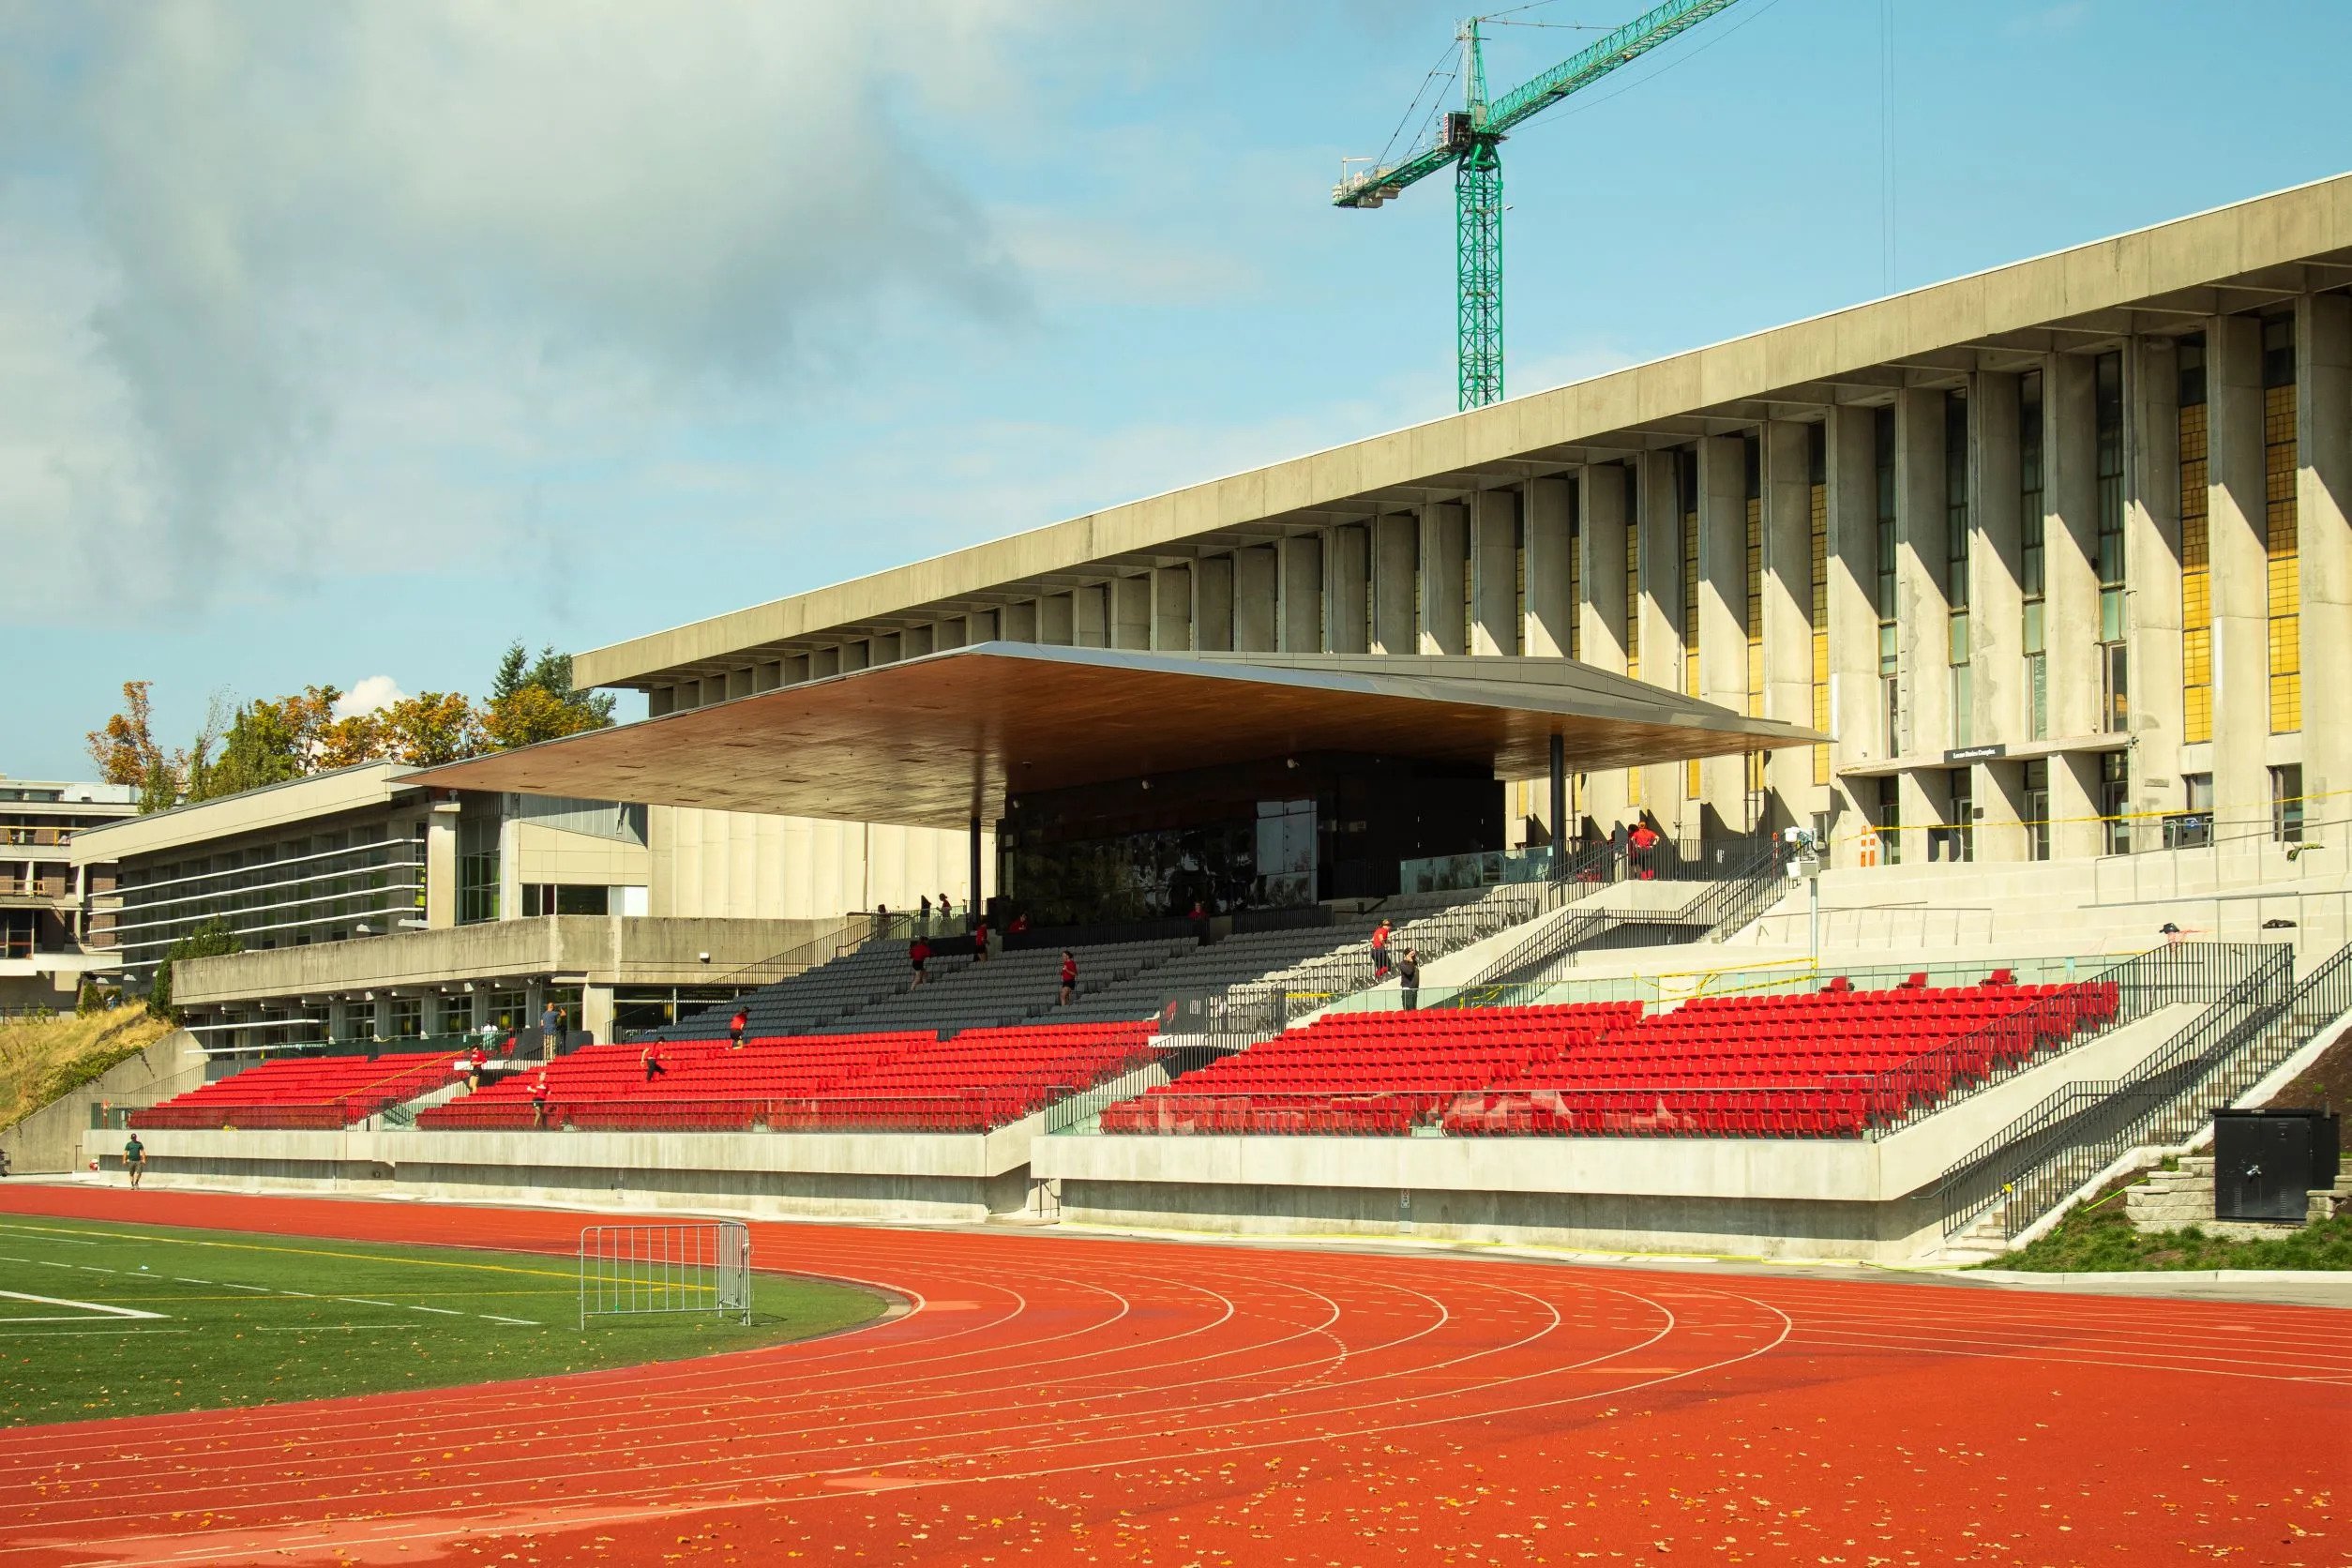 This is a photo of the SFU Stadium at the SFU Burnaby campus.